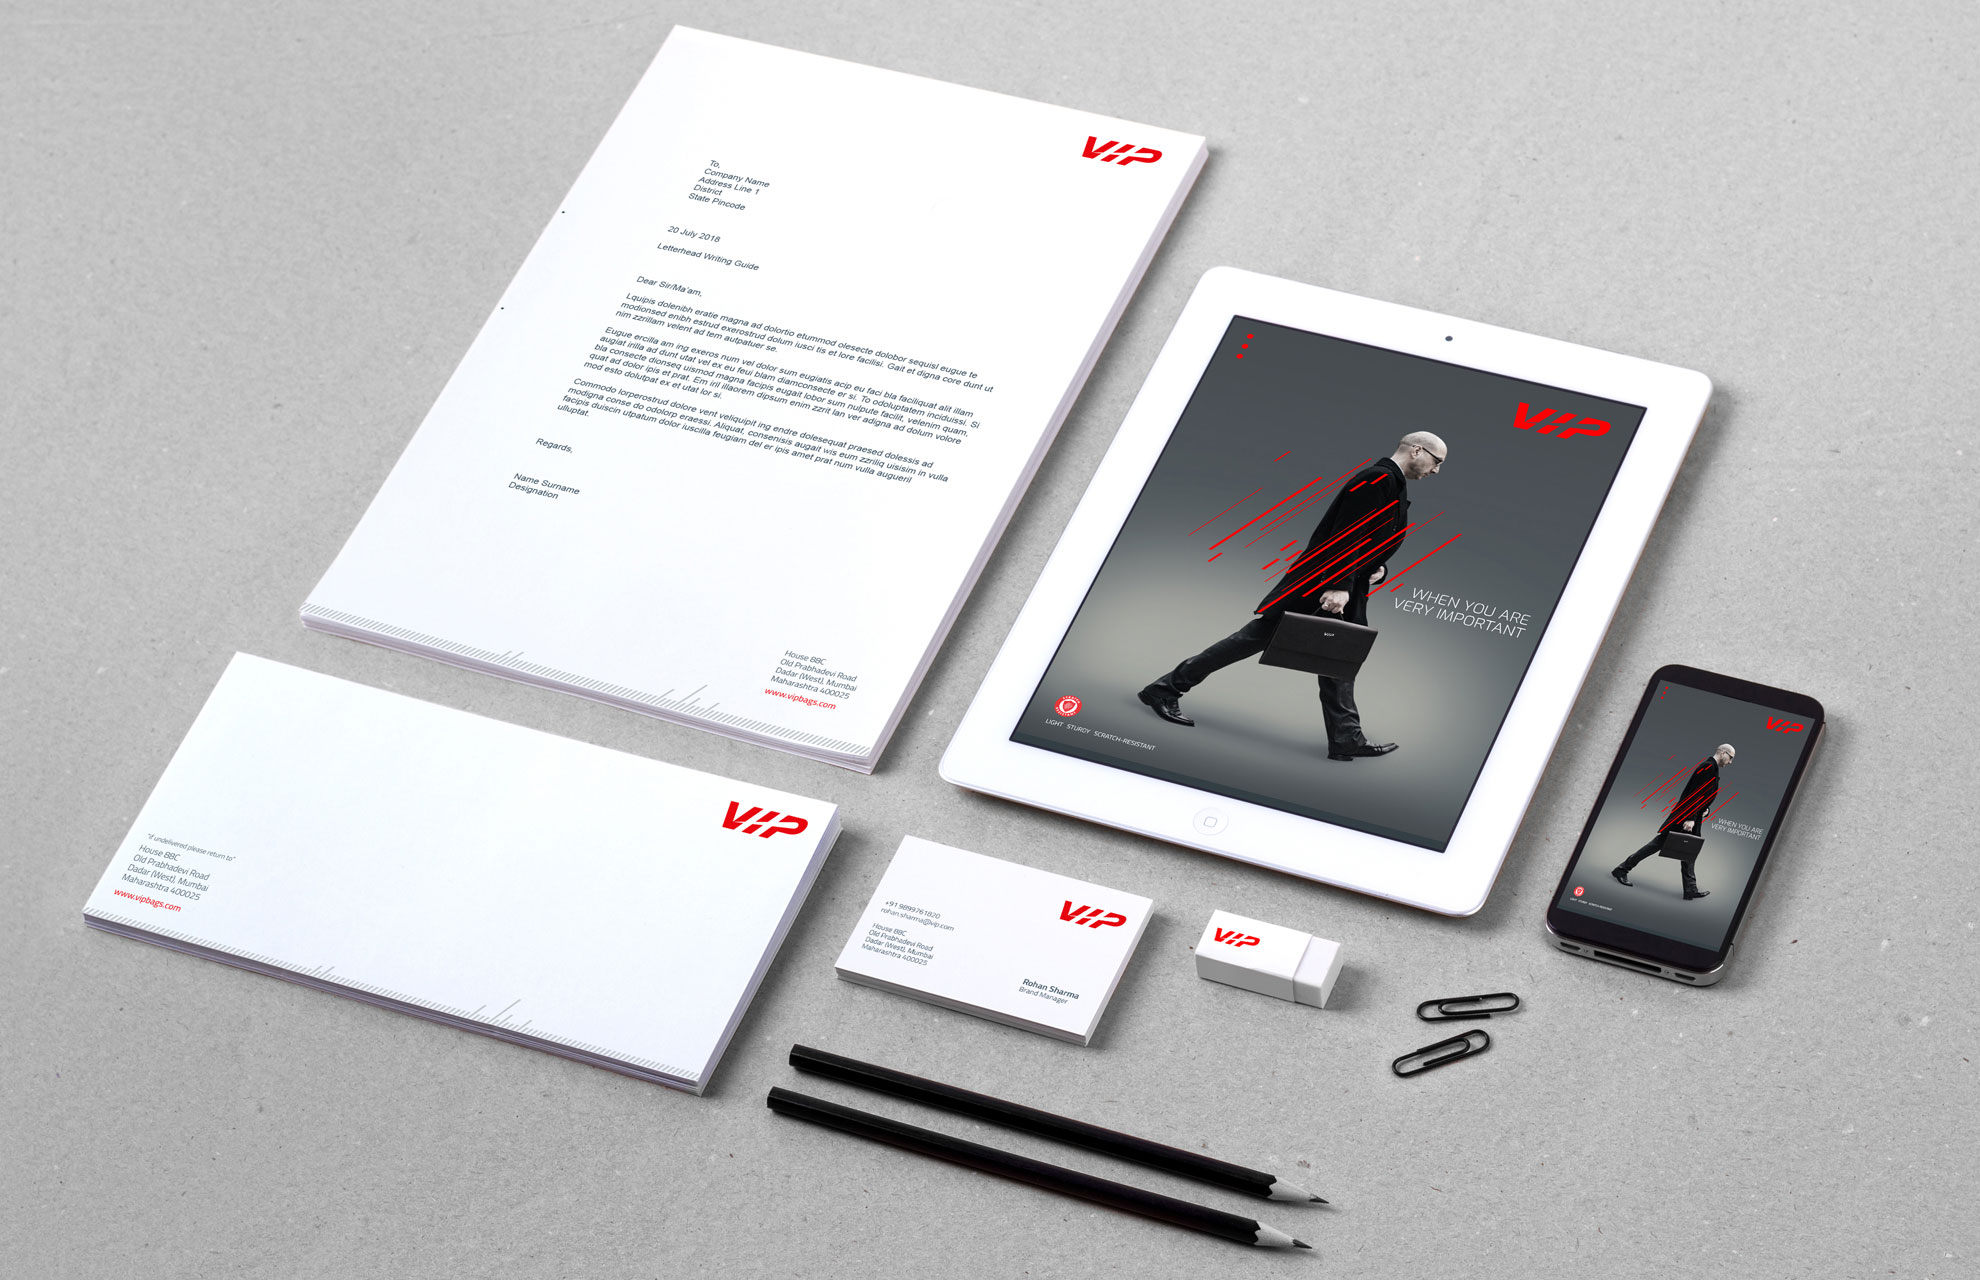 Collateral and stationary design for VIP by lopez design